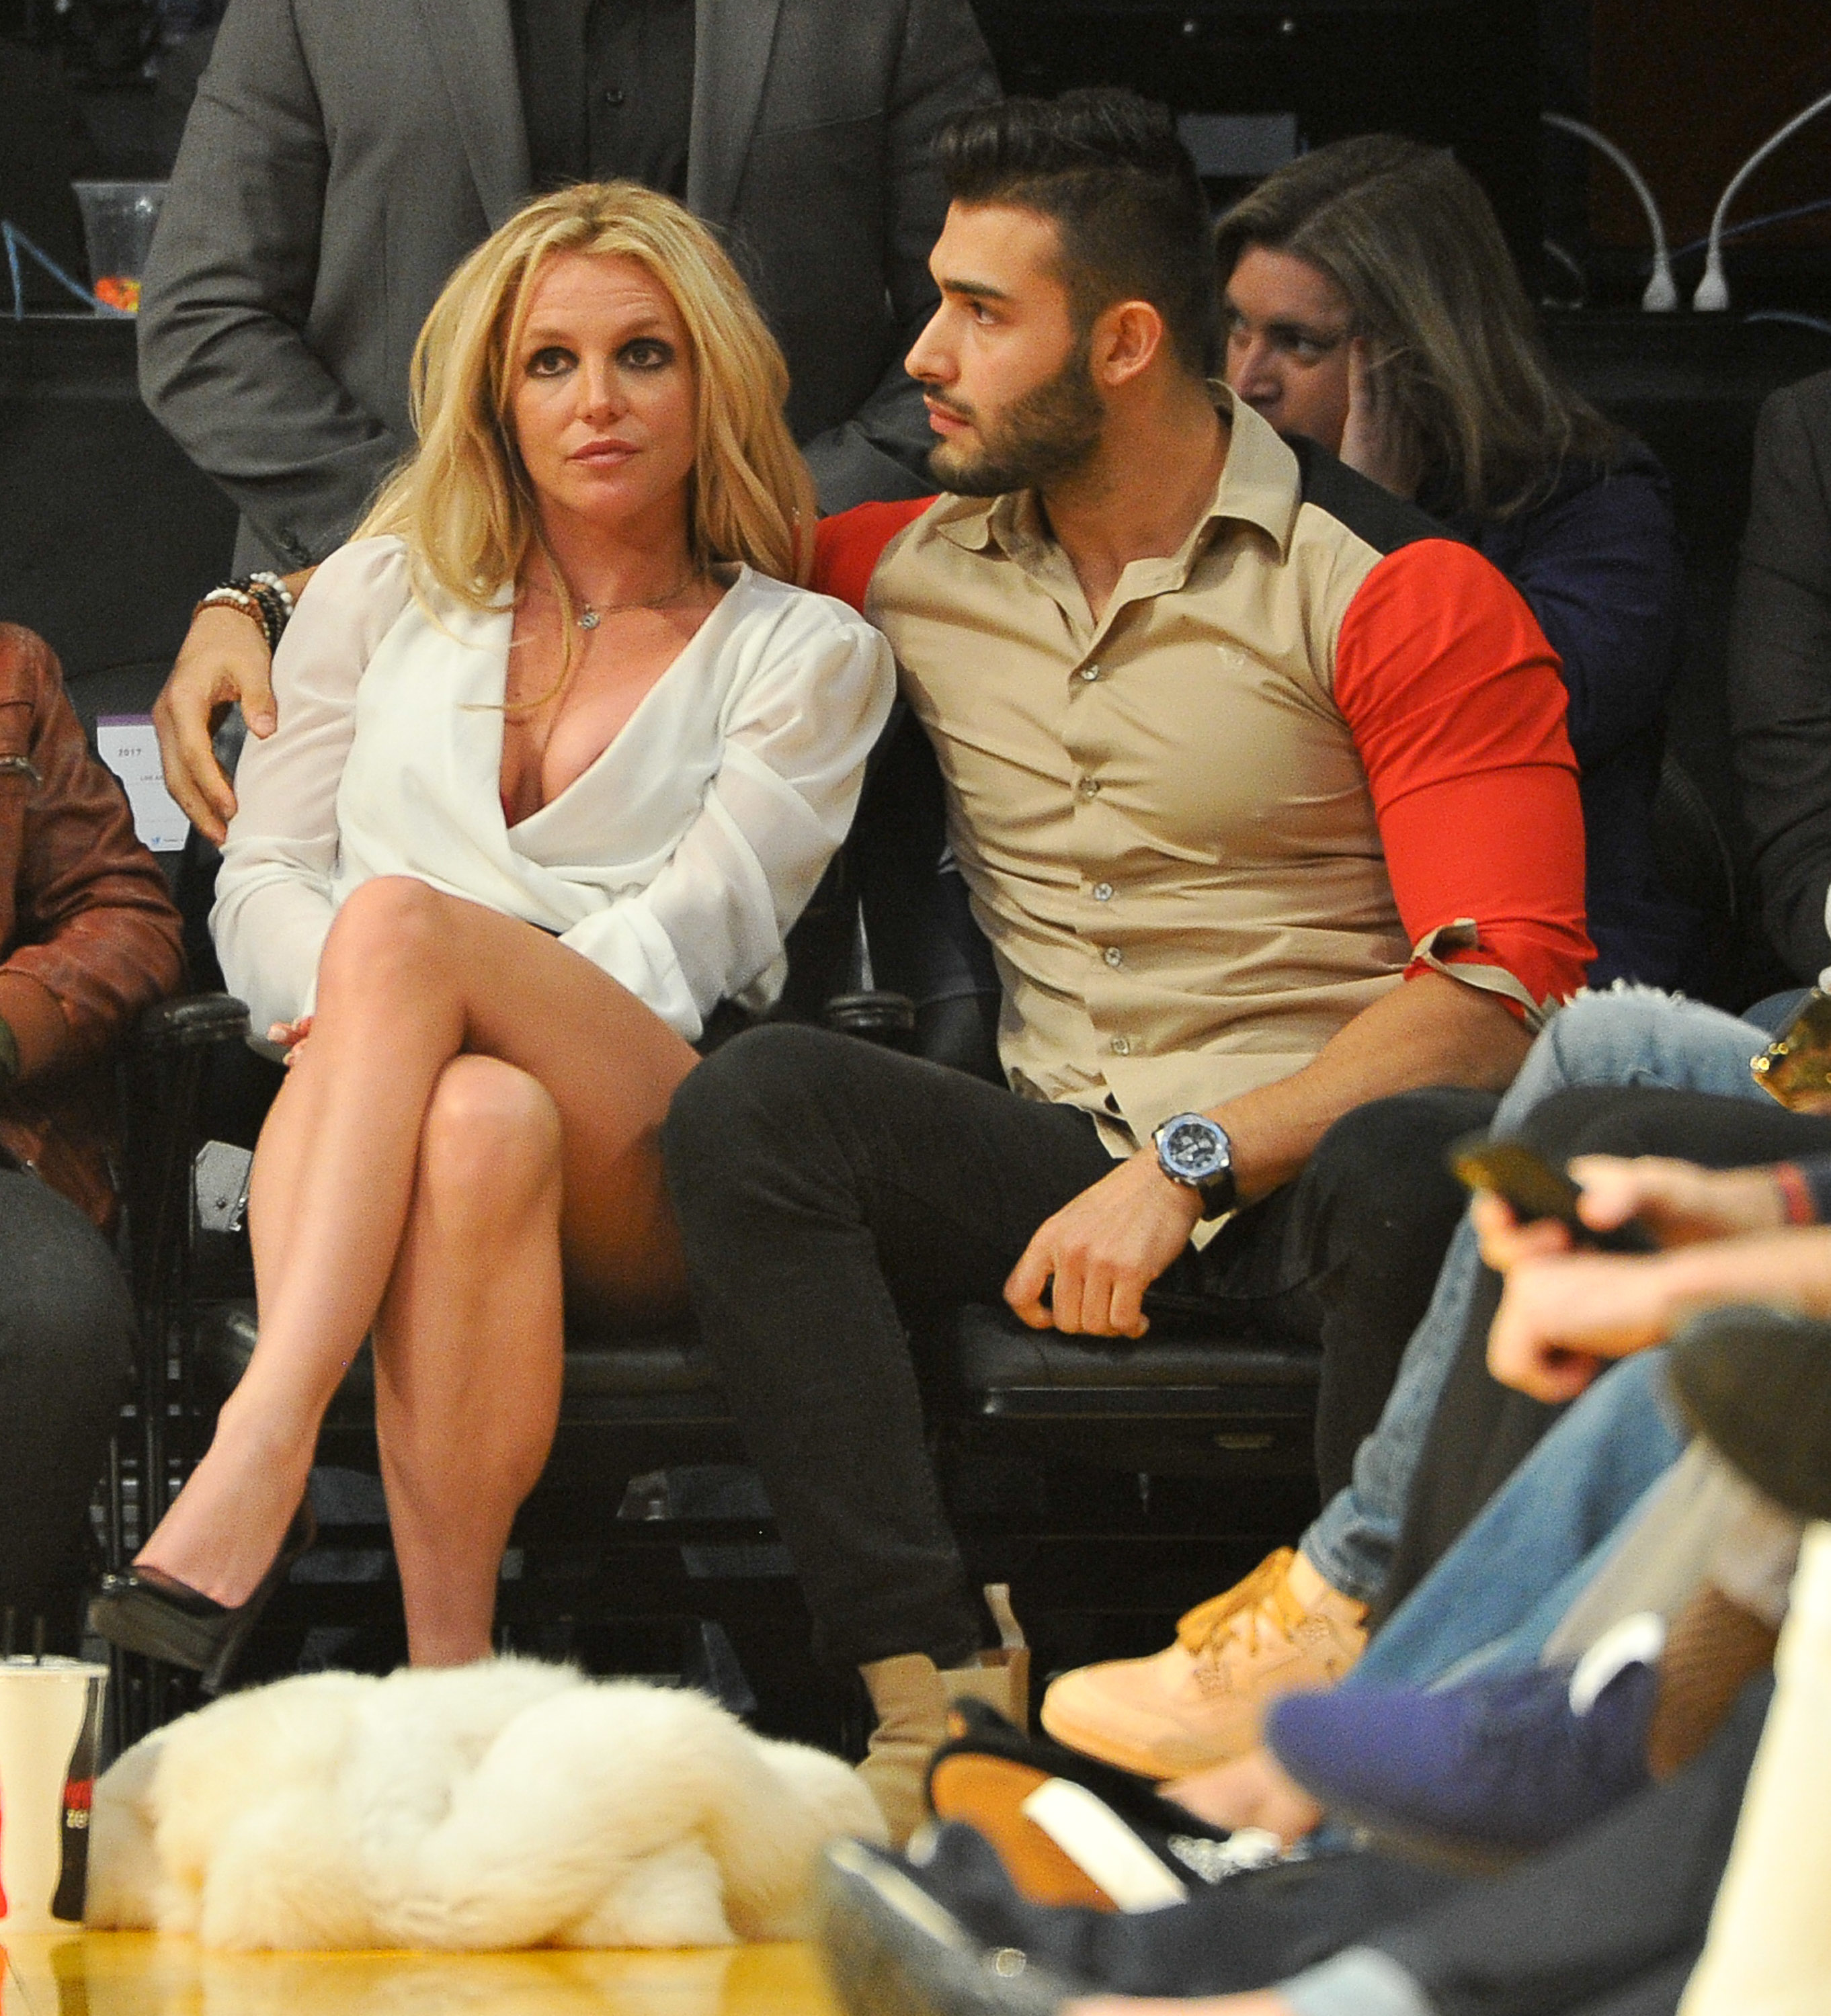 Close-up of Sam and Britney sitting together in the audience of a sports arena